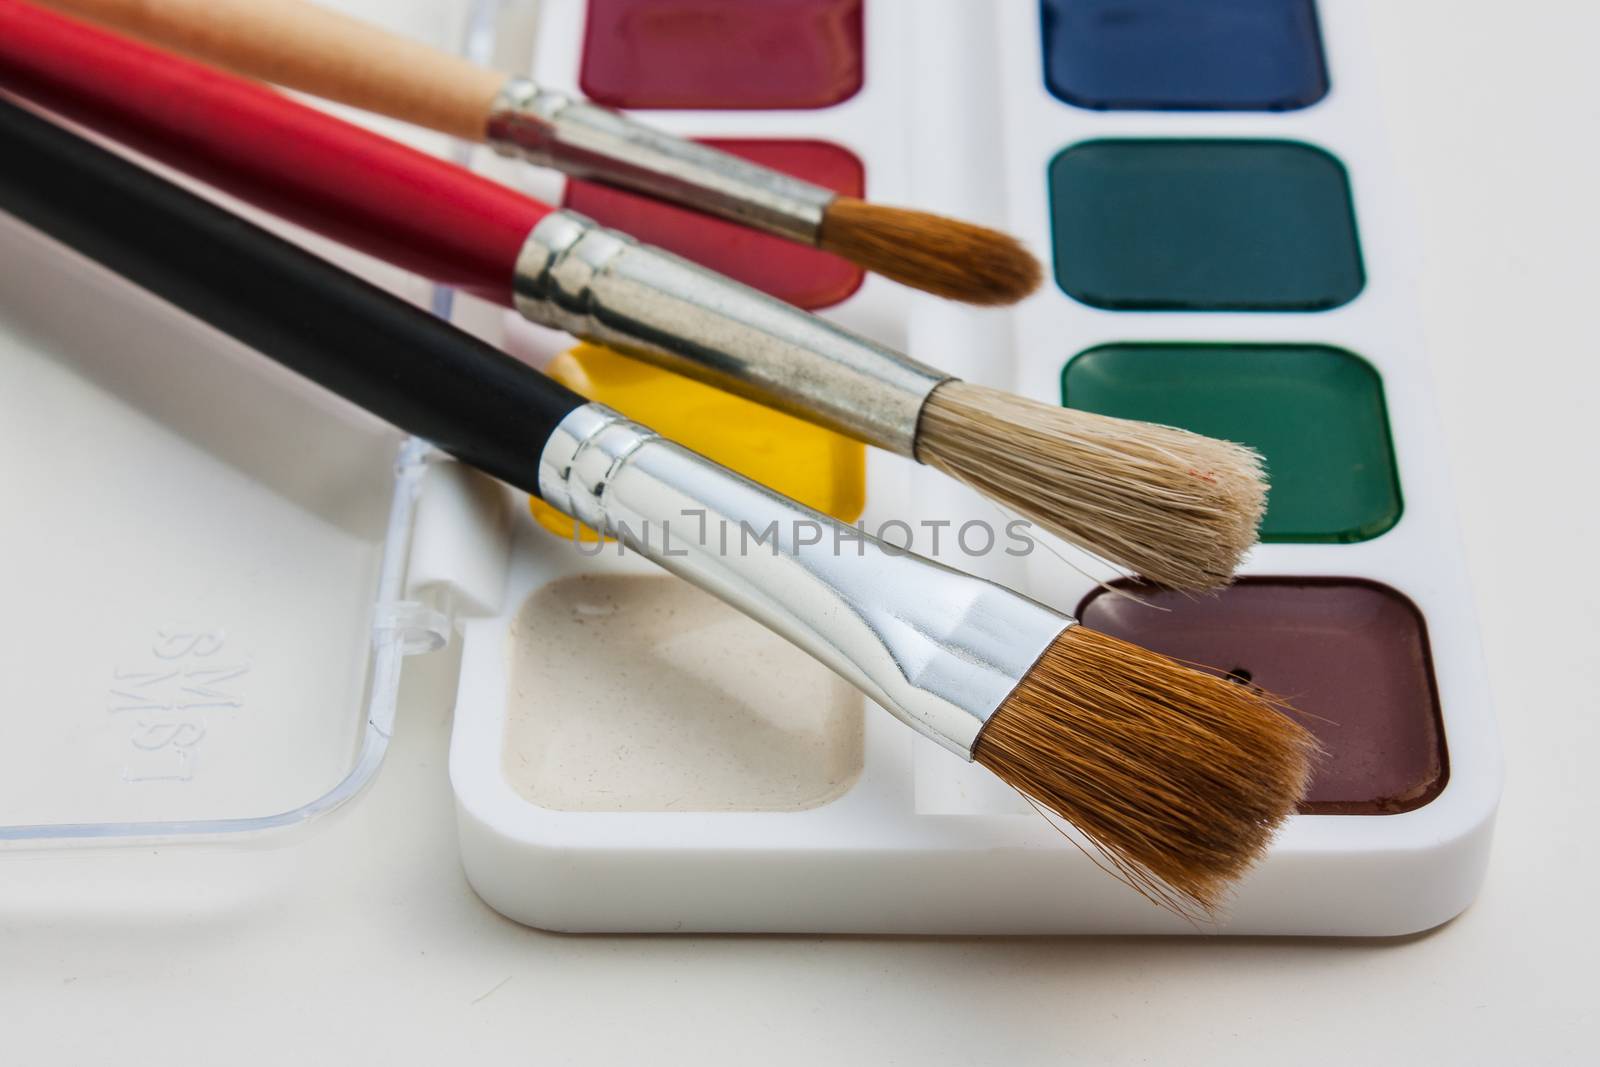 brushes and paints for drawing